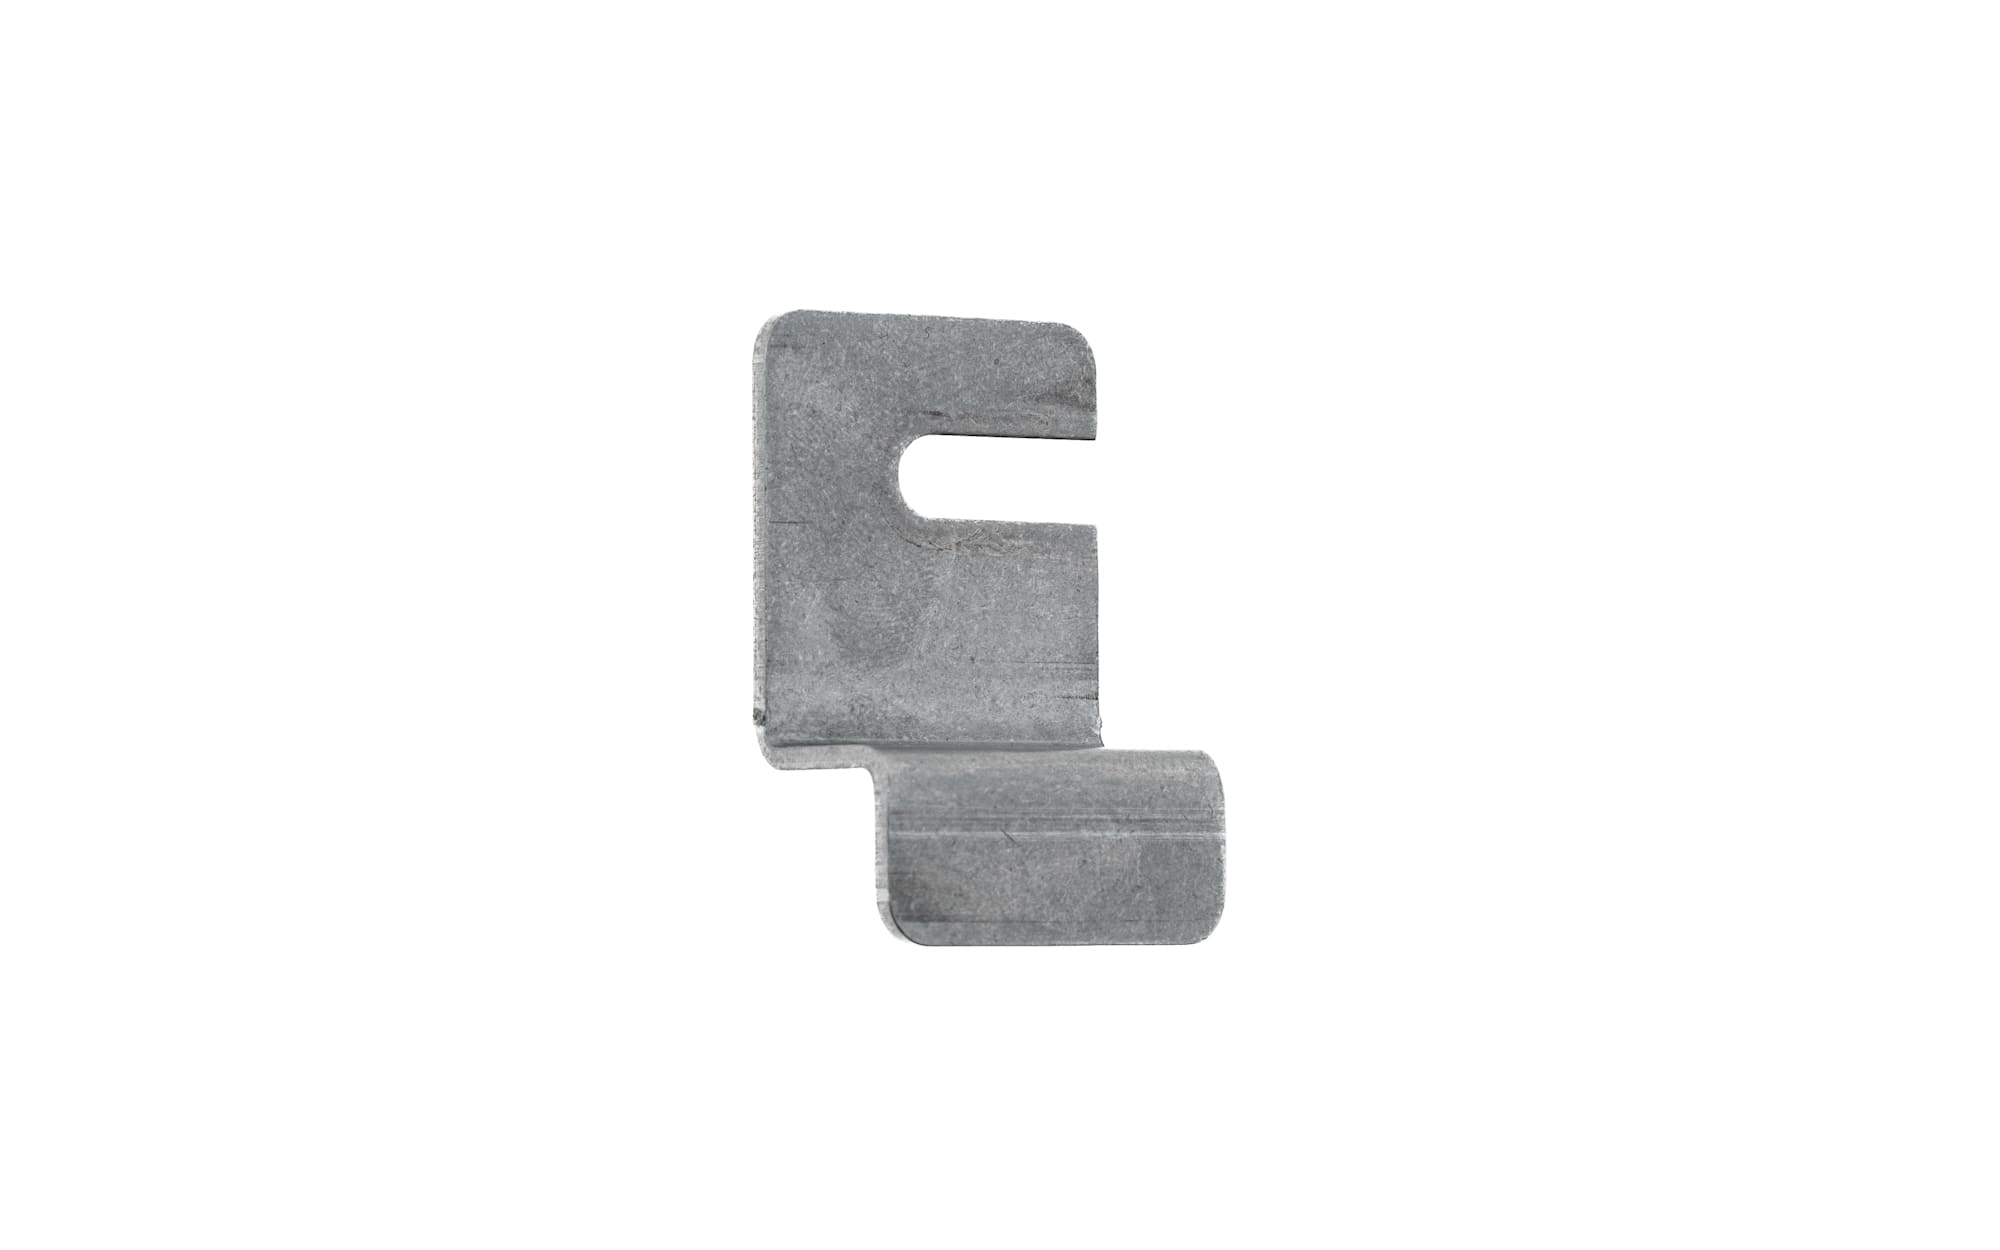 Cable clamp J-shaped - Closure element for 49648